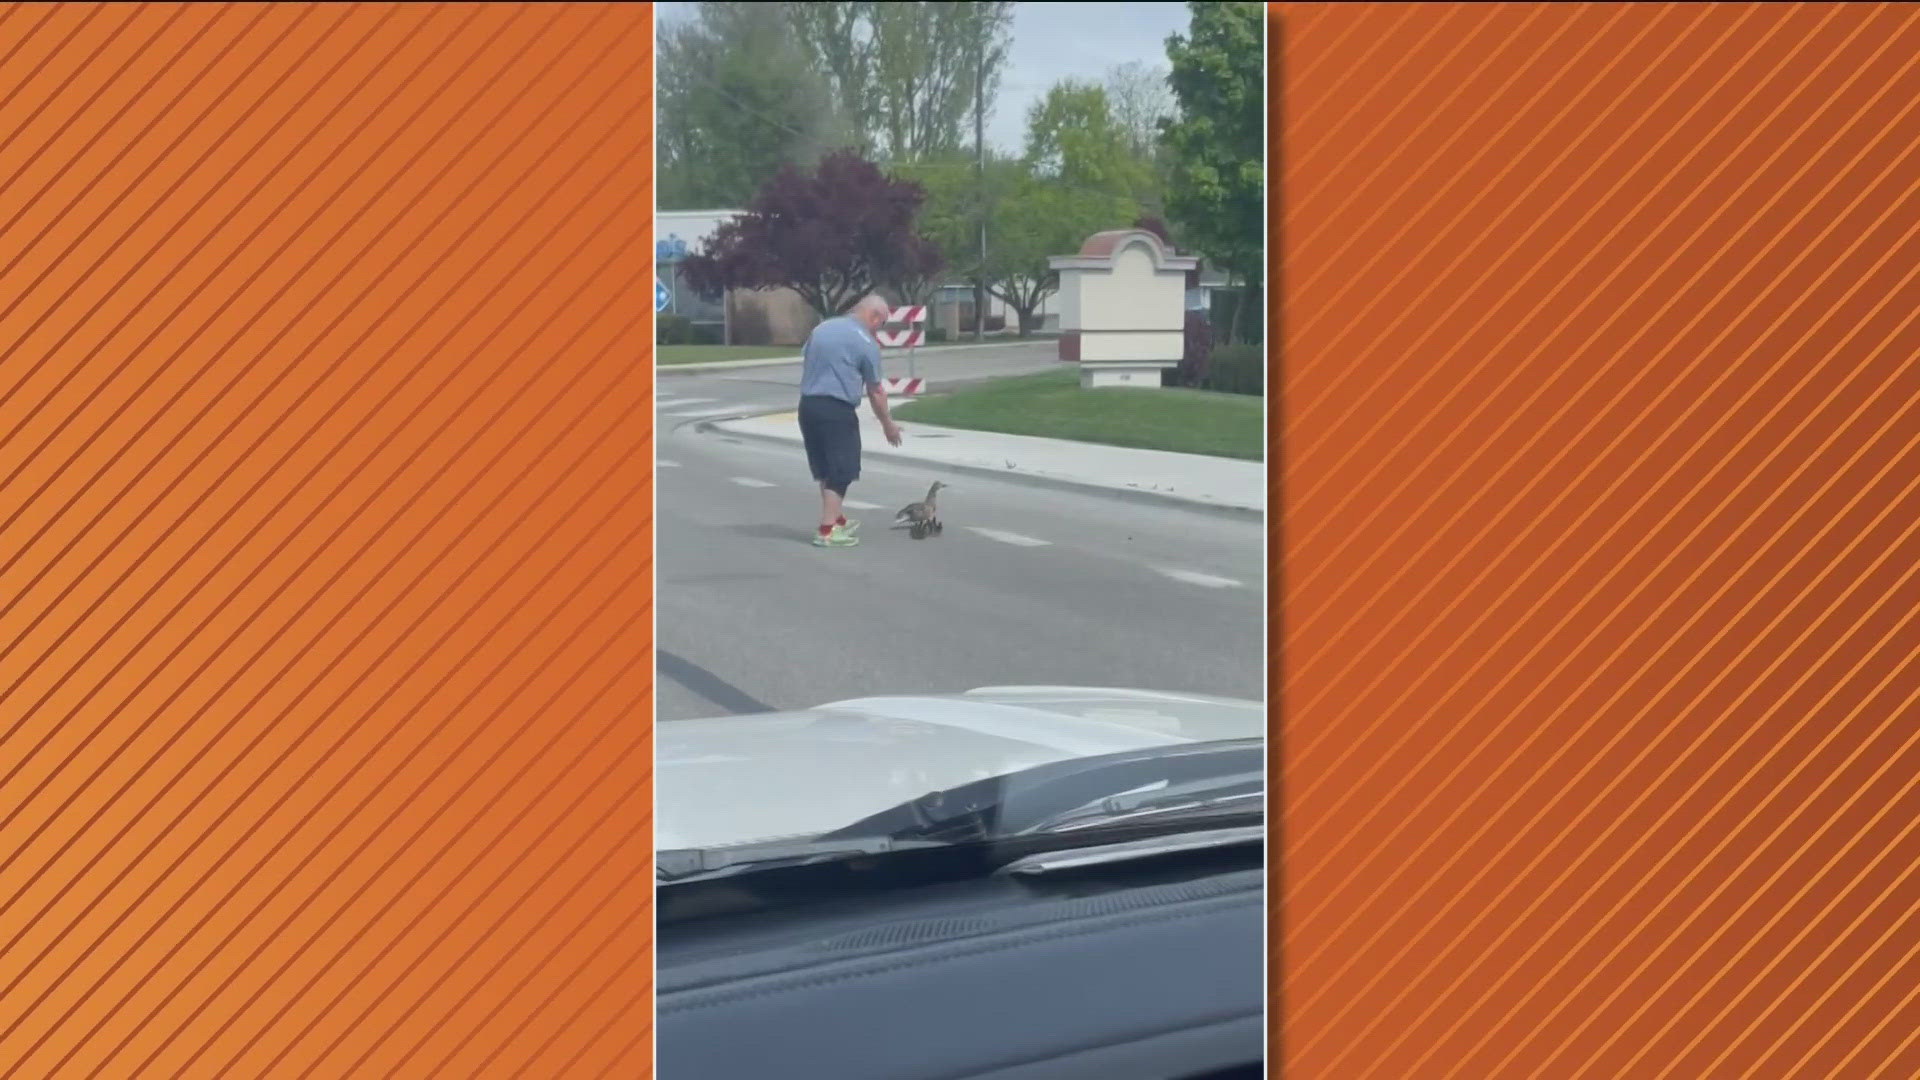 A man stopped traffic on State Street to escort the duck family safely to the sidewalk.